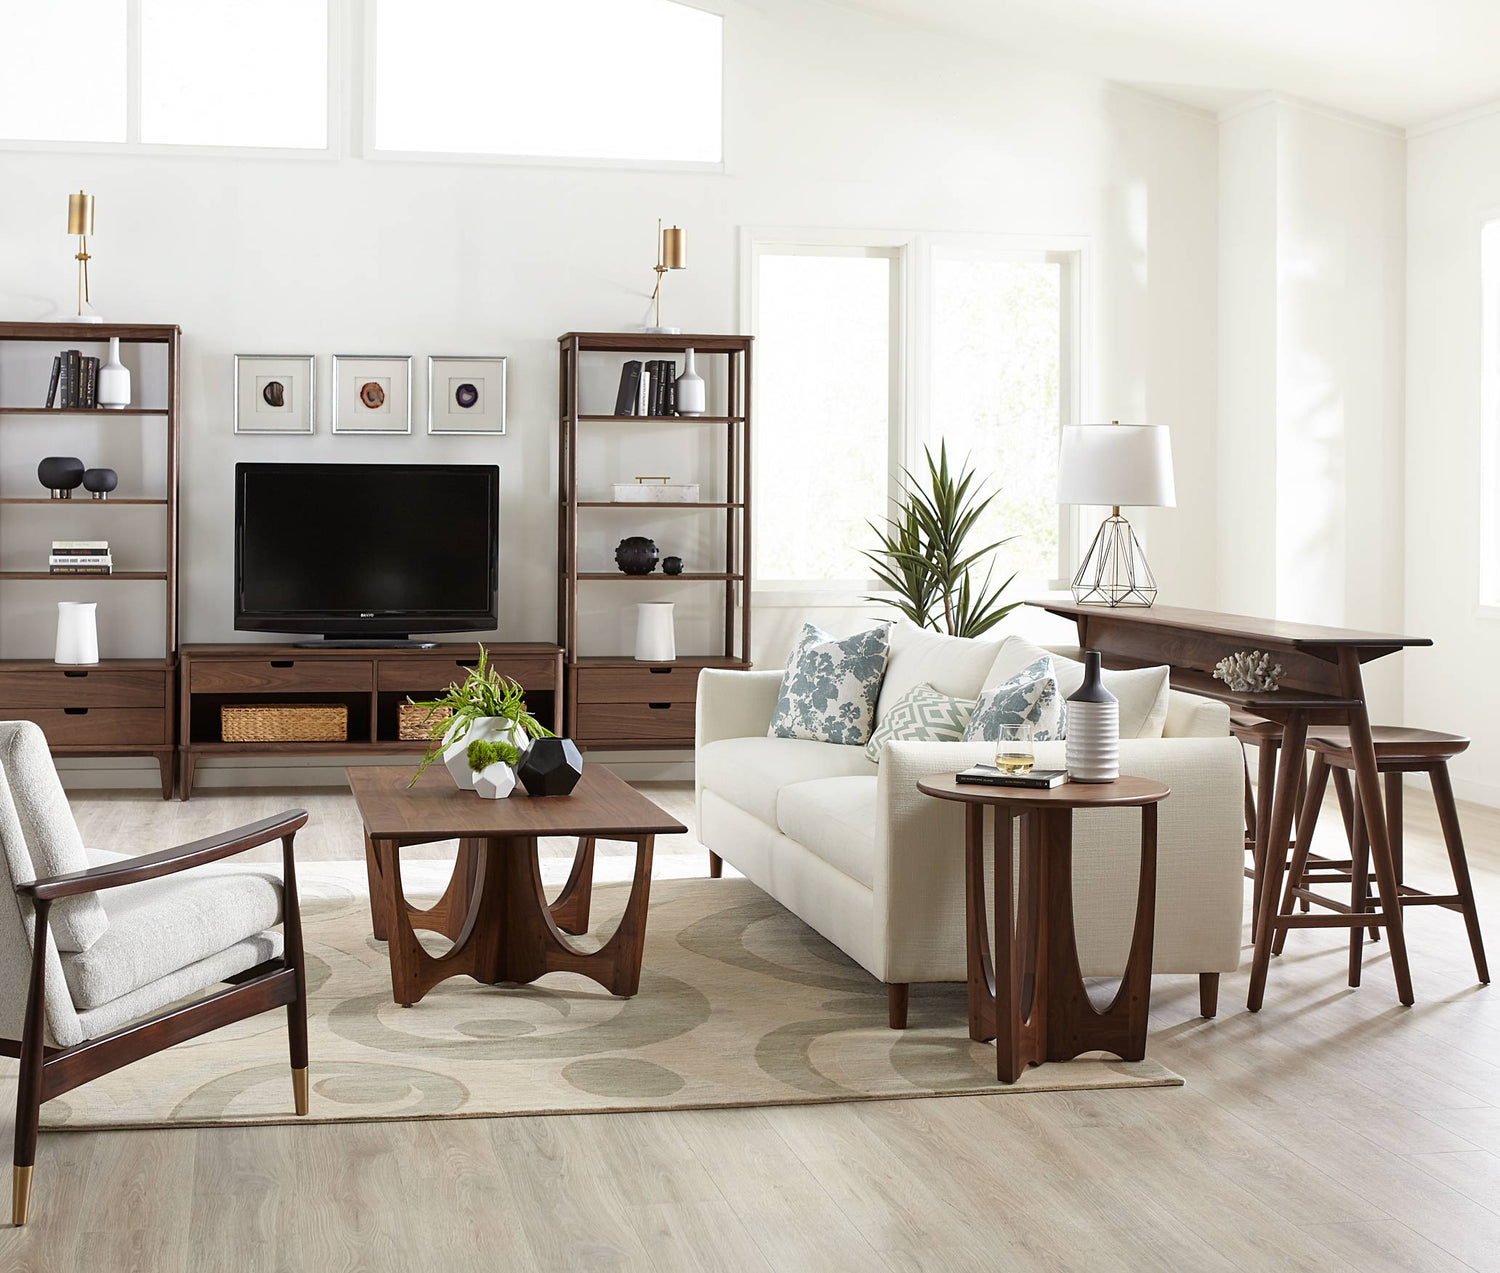 A Walnut Grove Morgan Sofa sits in a white, sunlight filled room with a matching gathering island with stools, end table, cocktail able surrounding it. There are two Walnut Grove Bookcases on either side of a Walnut Grove Entertainment Console that has a TV on it in the background